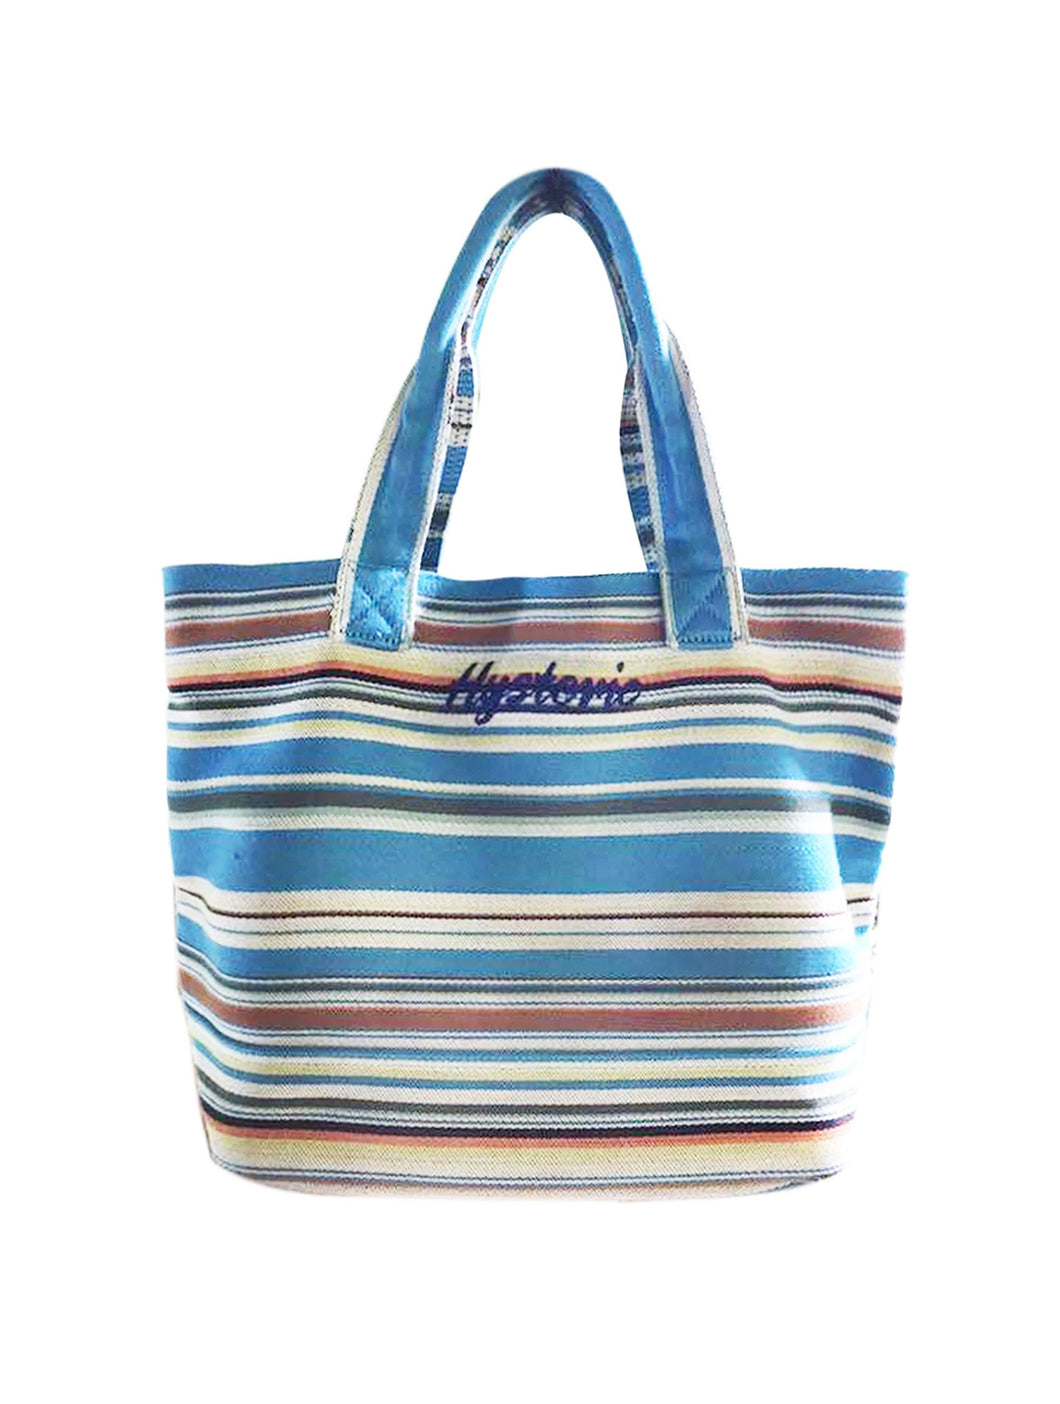 Hysteric Glamour Blue Striped Tote